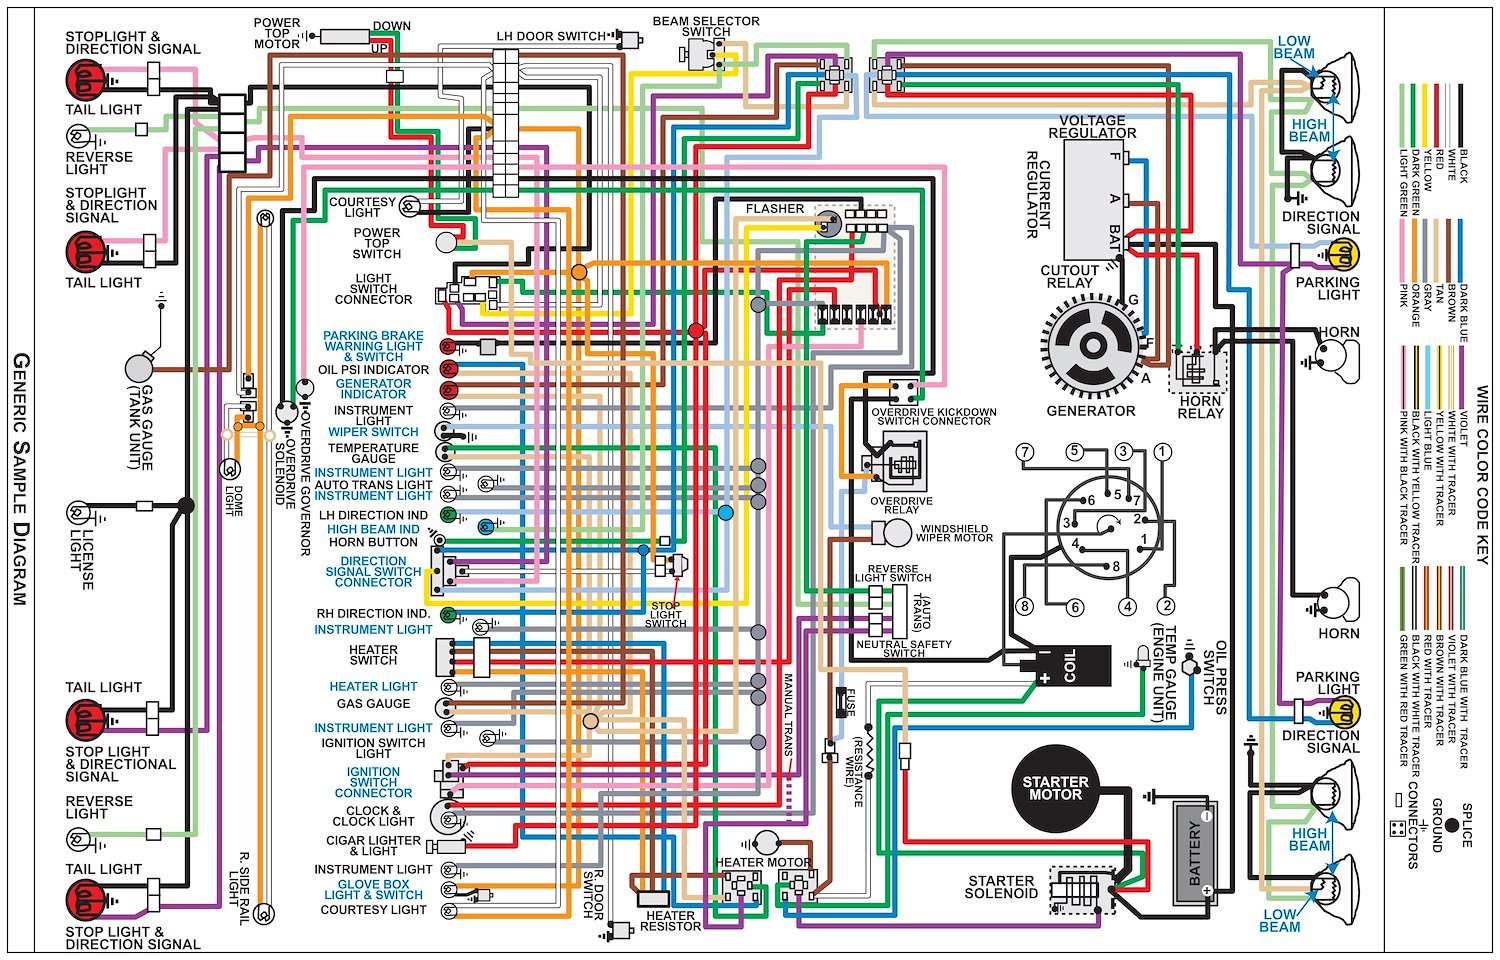 Wiring Diagram for 1971 Dodge Dart, Demon with Rallye Dash, 11 in x 17 in., Laminated